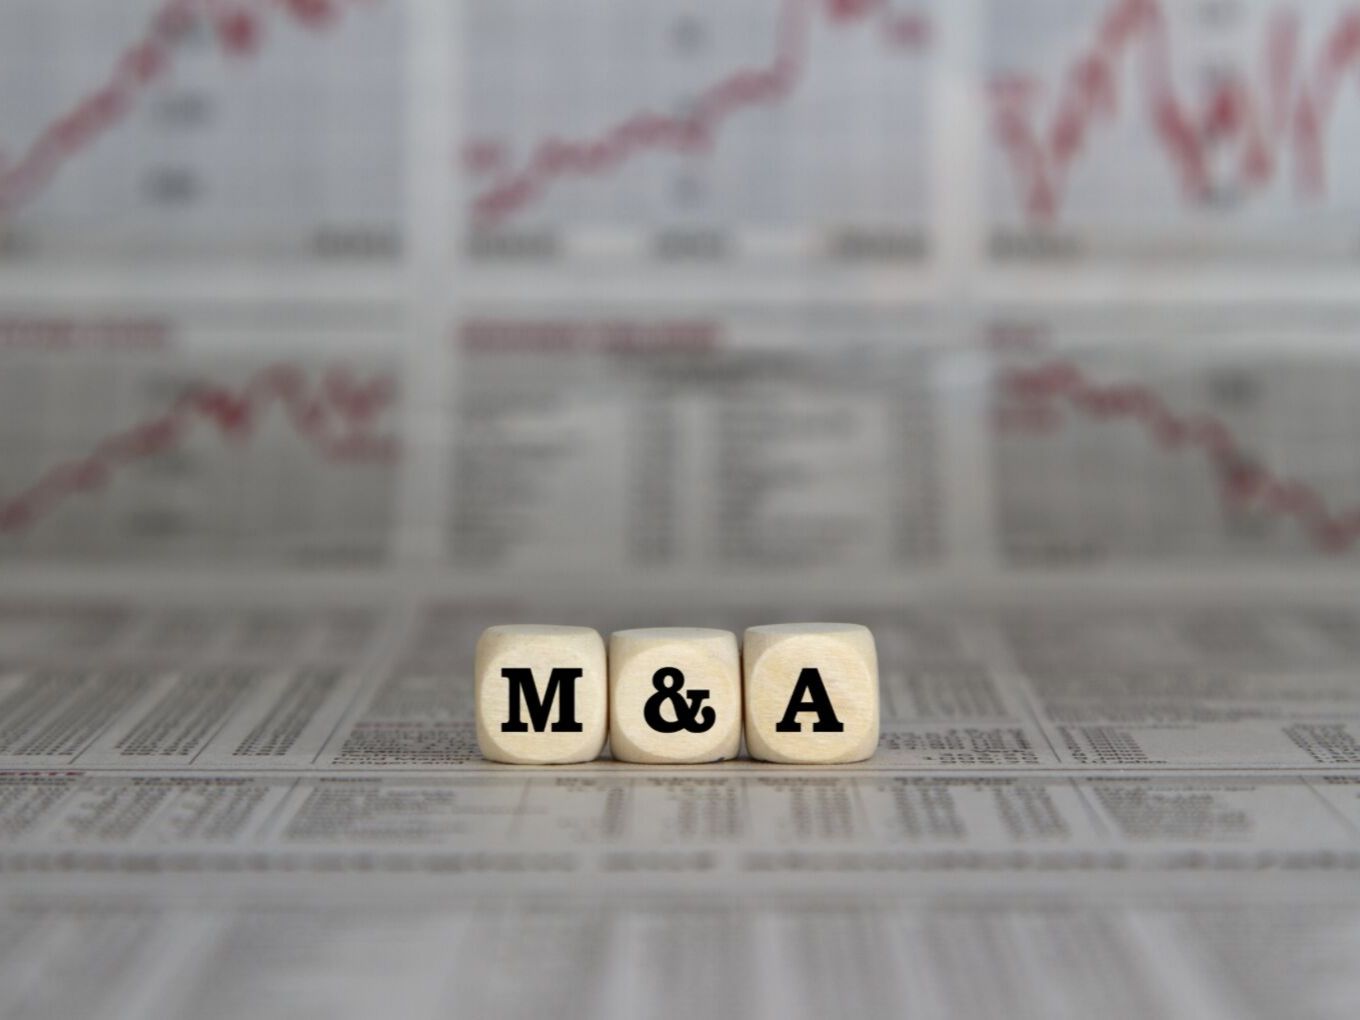 MCA Raises Threshold Limits For M&As Requiring CCI Approval